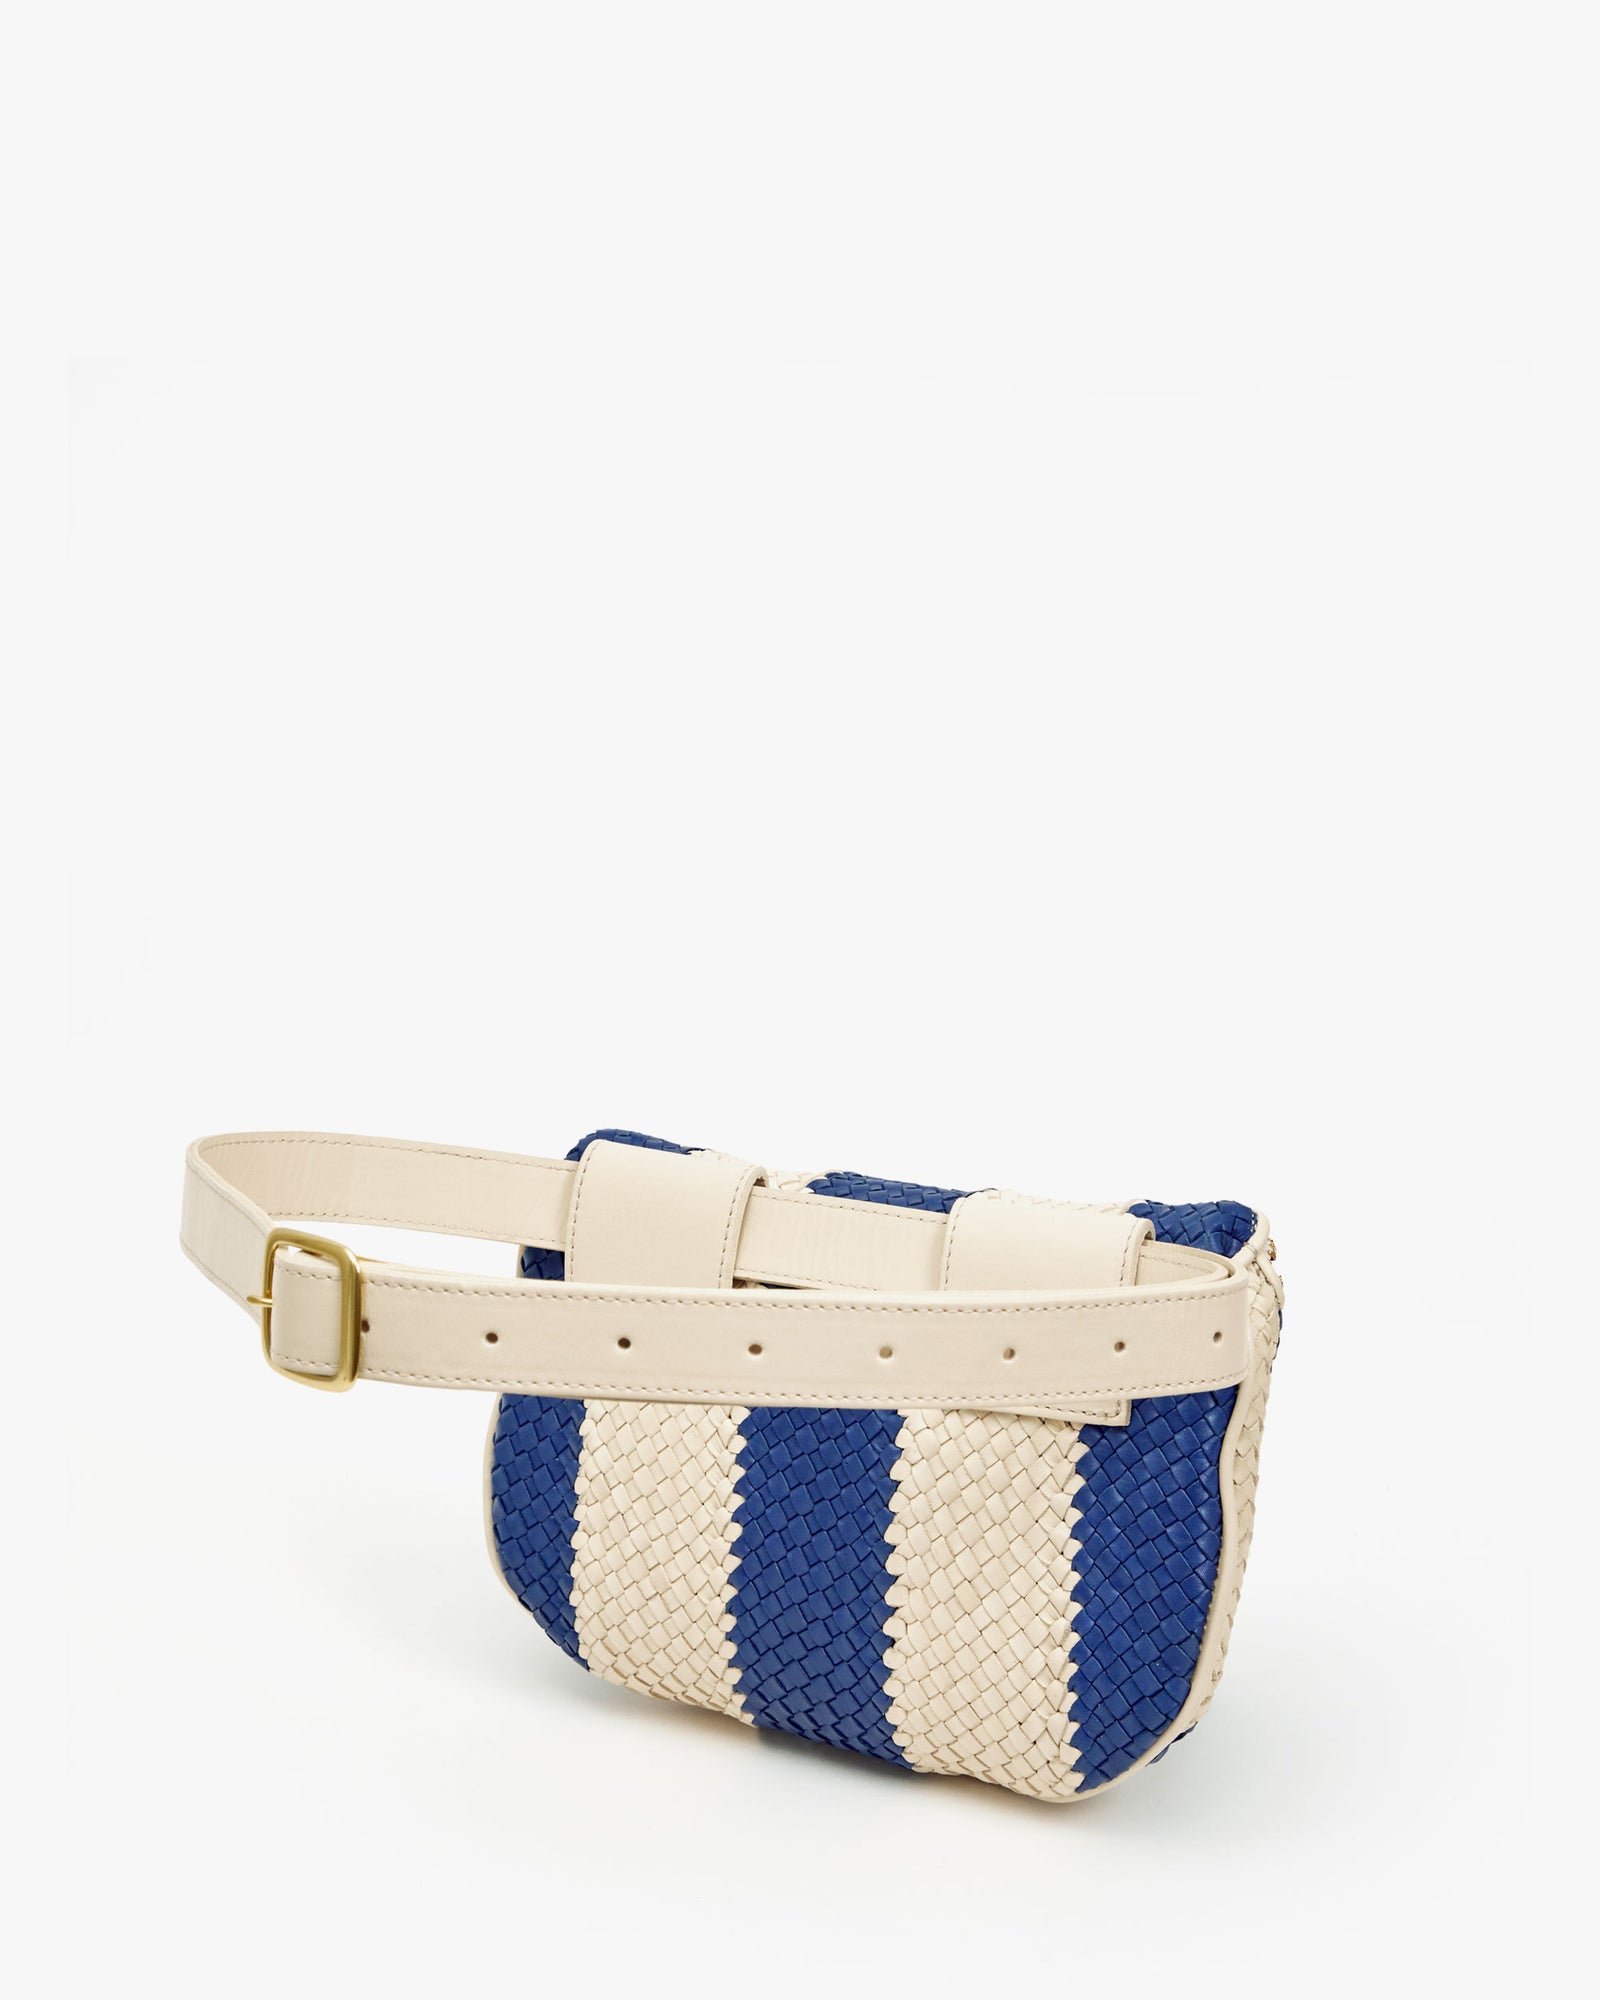 Indigo & Cream Woven Racing Stripes Fanny Pack, View from the Back